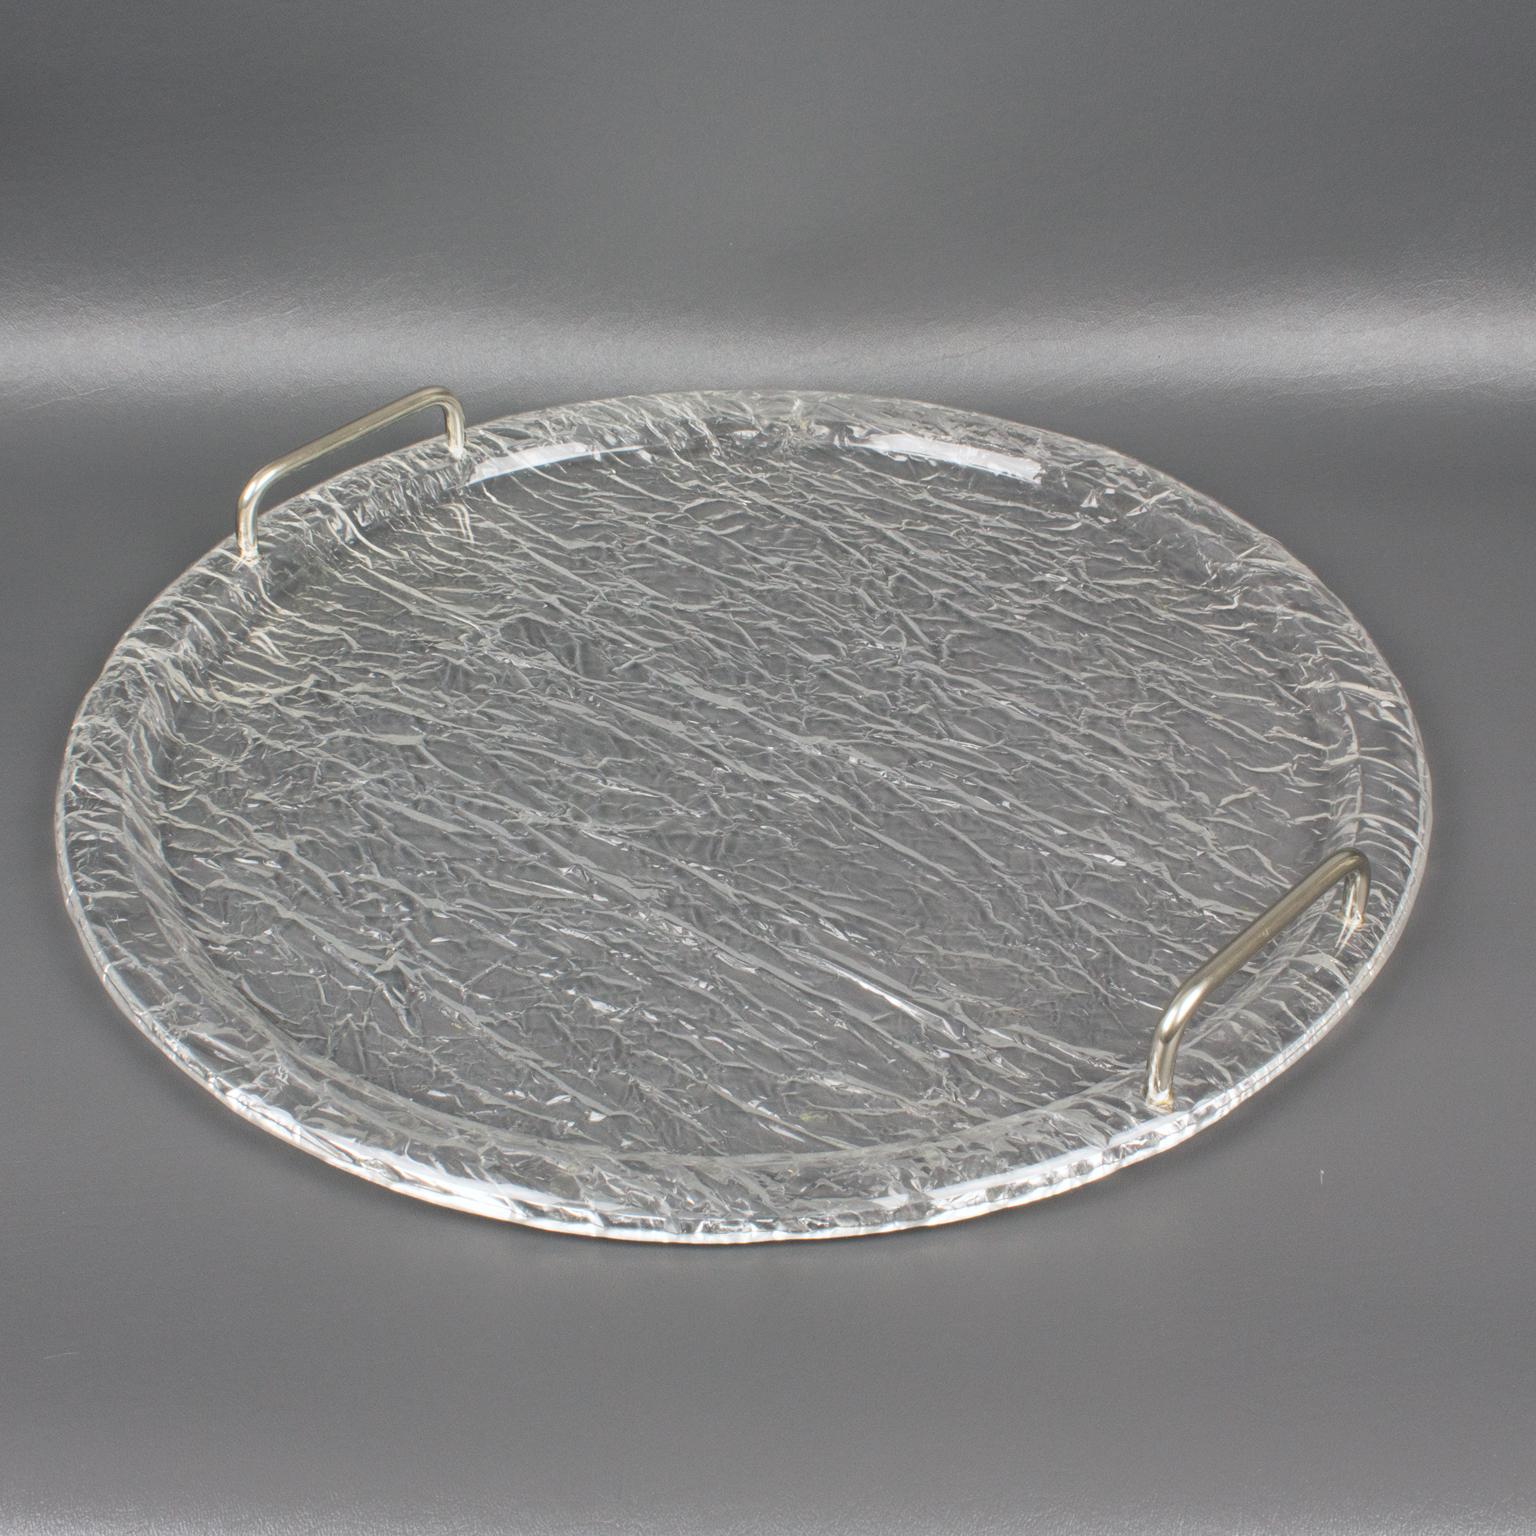 Refined 1970s modernist barware serving tray platter, design attributed to Willy Rizzo. Large round shape with crystal clear Lucite in a stunning wrinkled molded pattern that gives a frosty effect and two chromed metal handles.
Measurements: 17.13